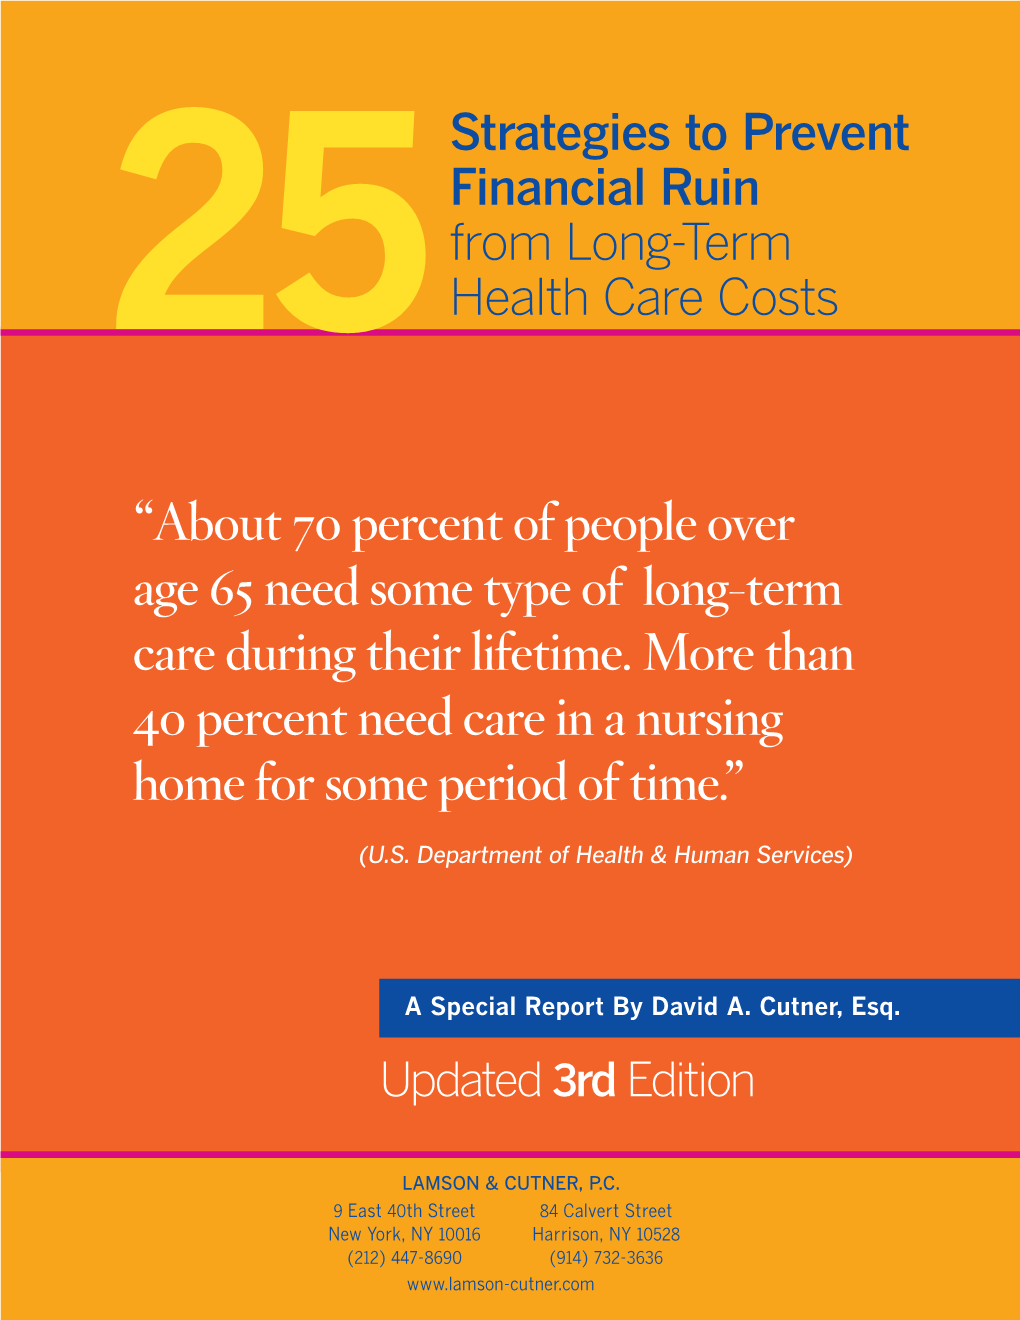 Age 65 Need Some Type of Long-Term Care During Their Lifetime. More Than